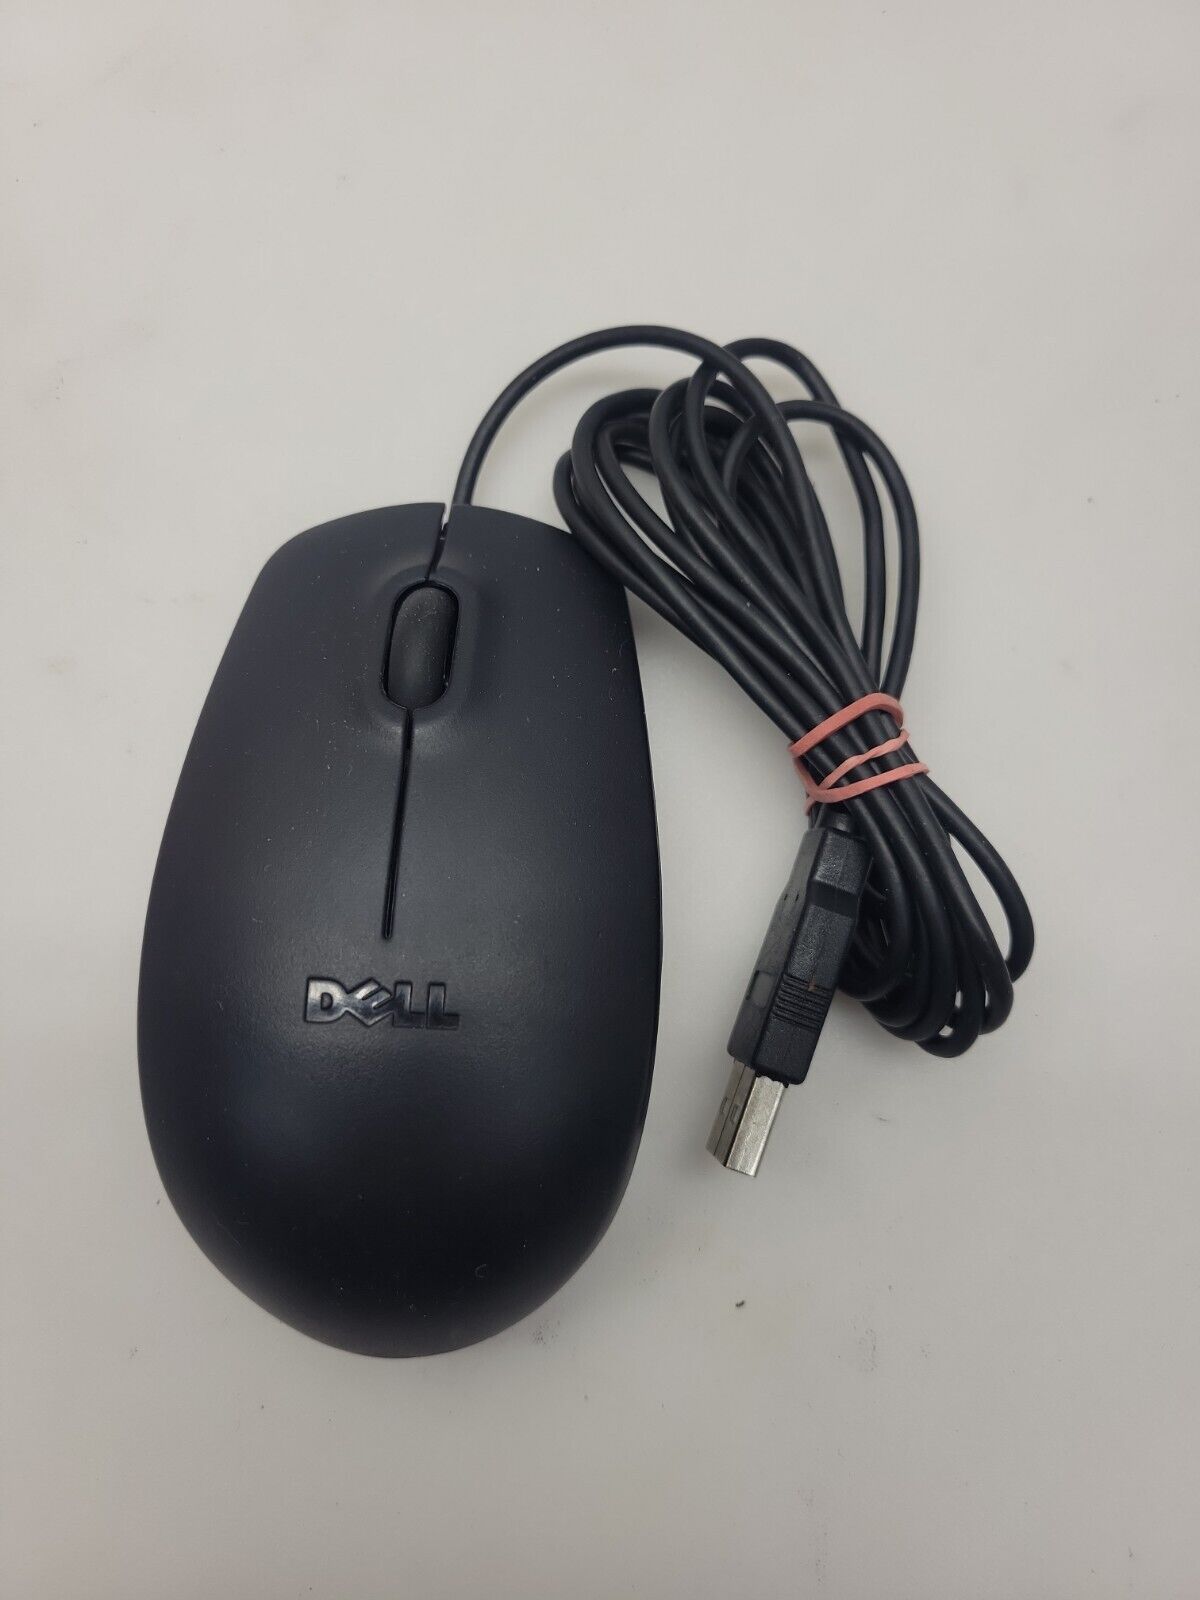 #N) Dell Genuine MS111-P USB Optical Mouse 